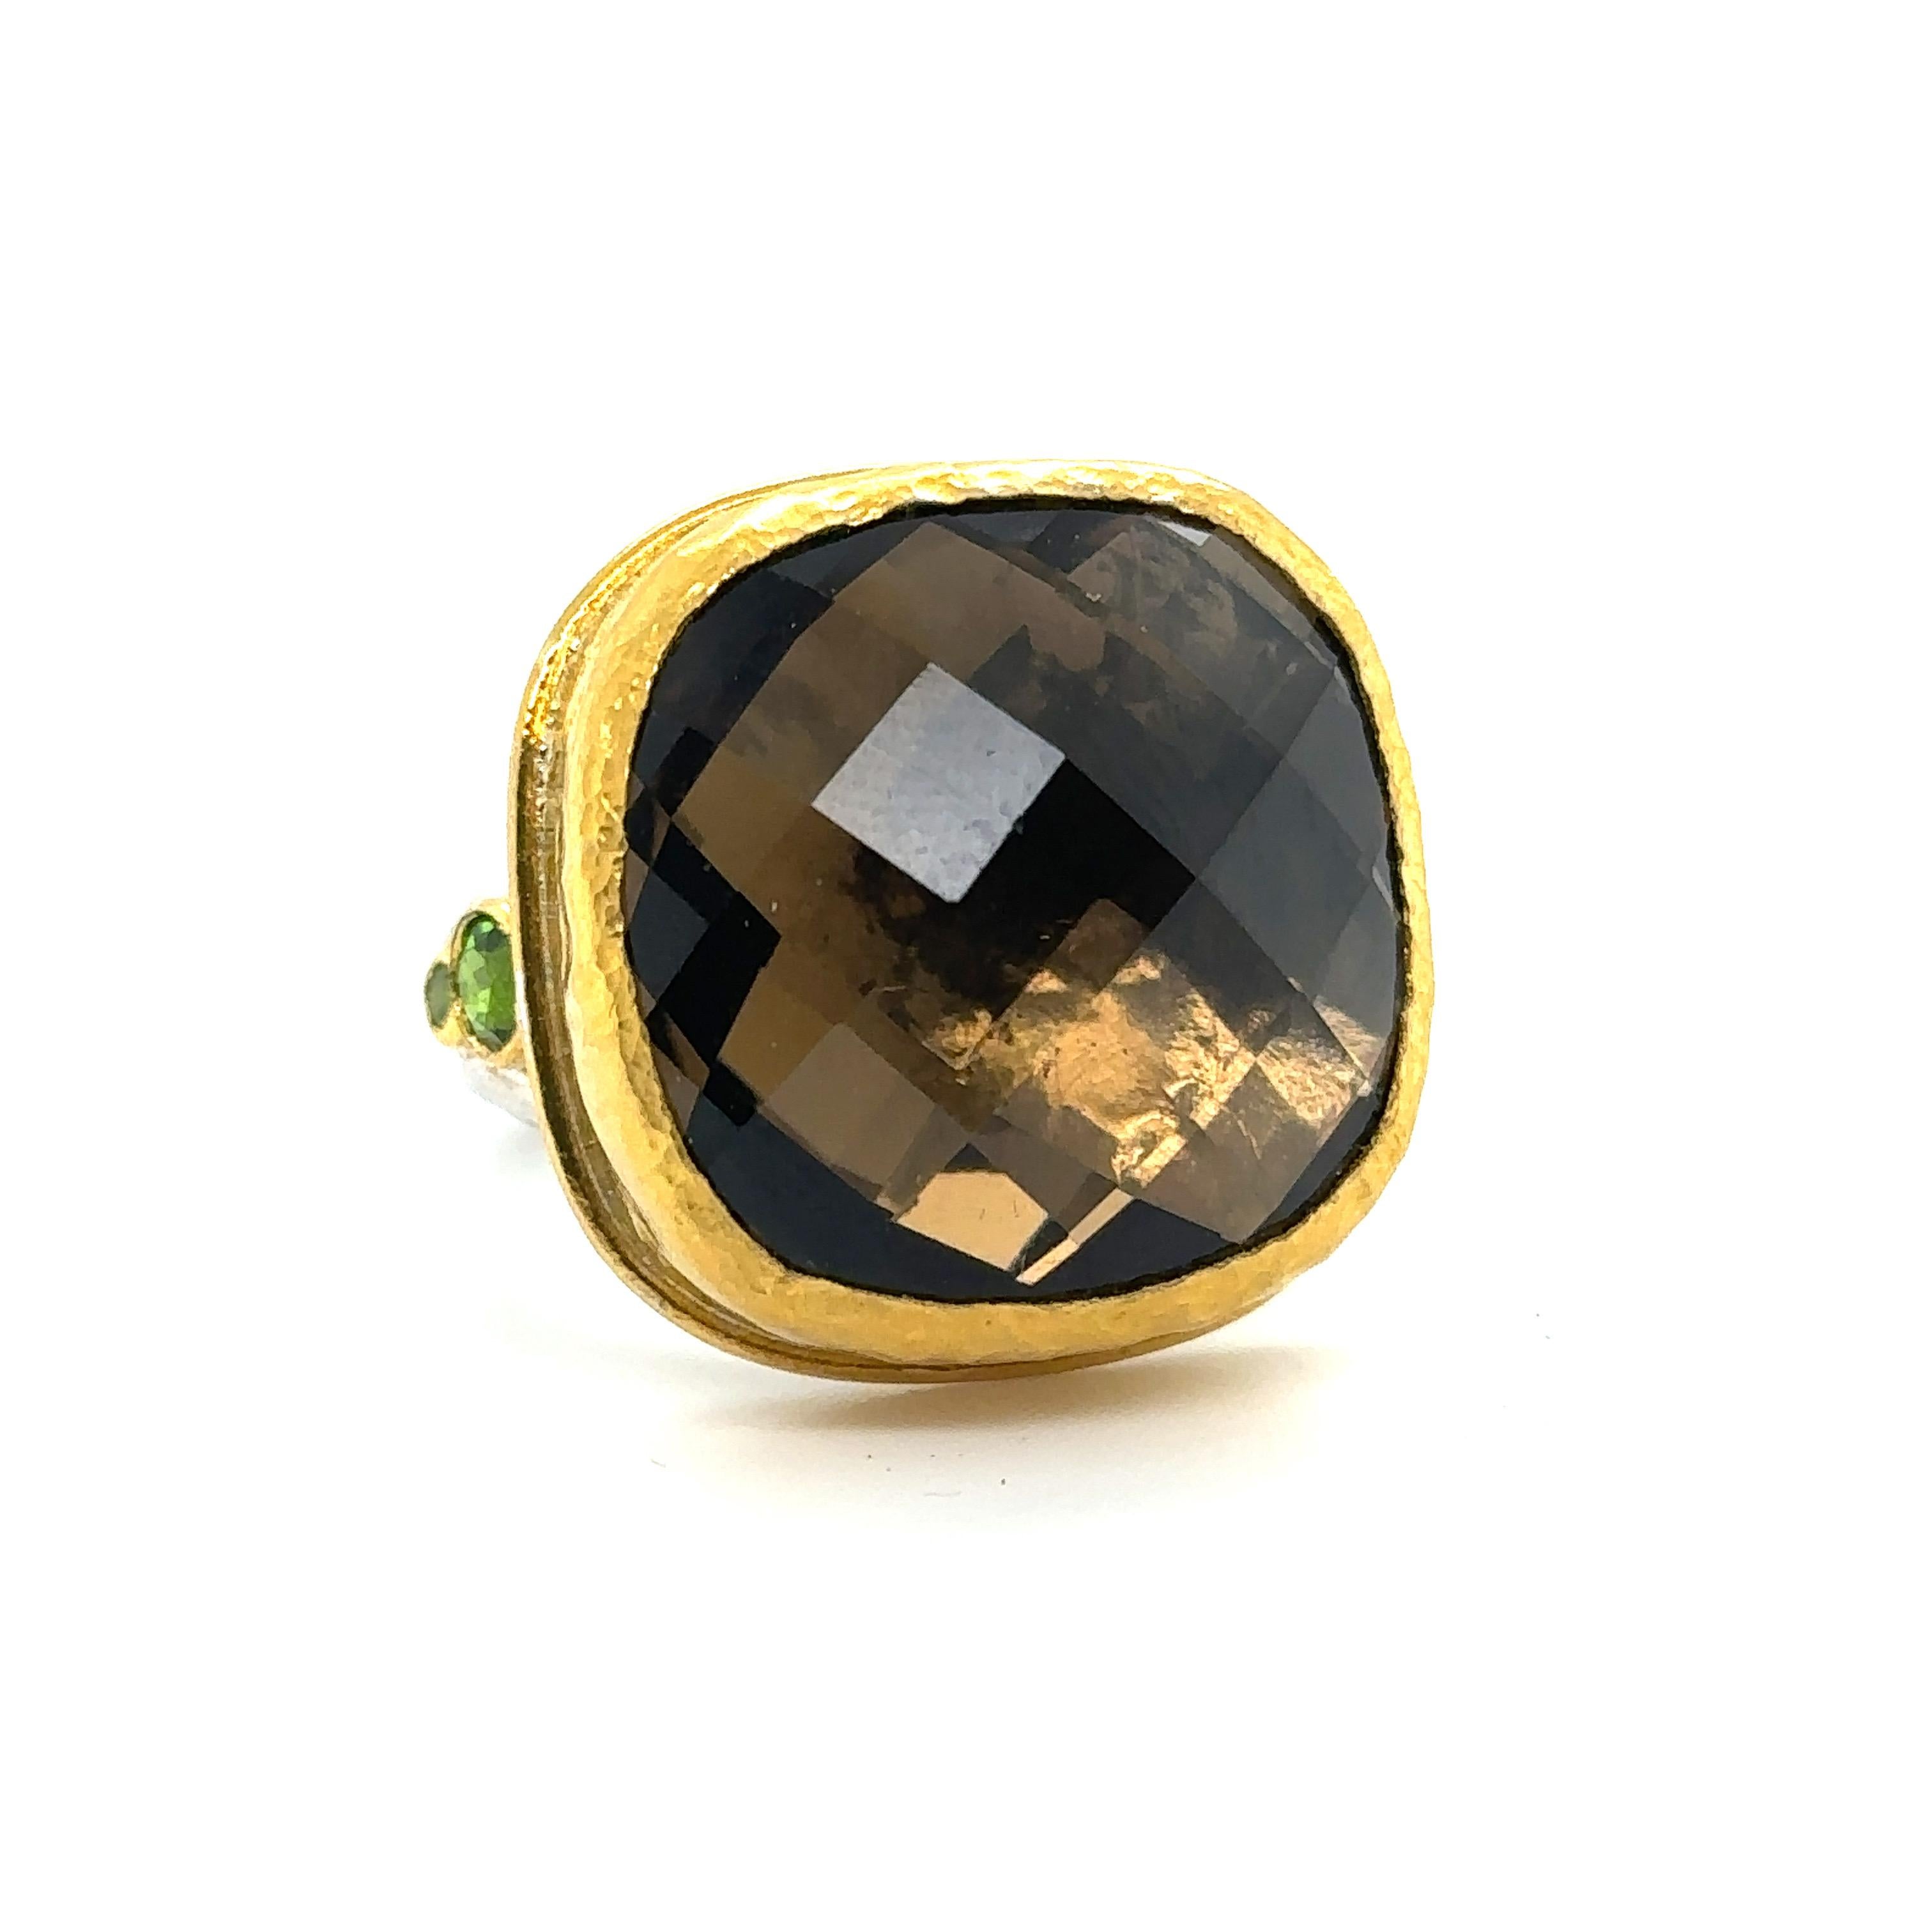 JAS-19-1993-24KT GOLD/SS with CUSHION CUT SMOKY QUARTZ & CHROME DIOPSIDES For Sale 6